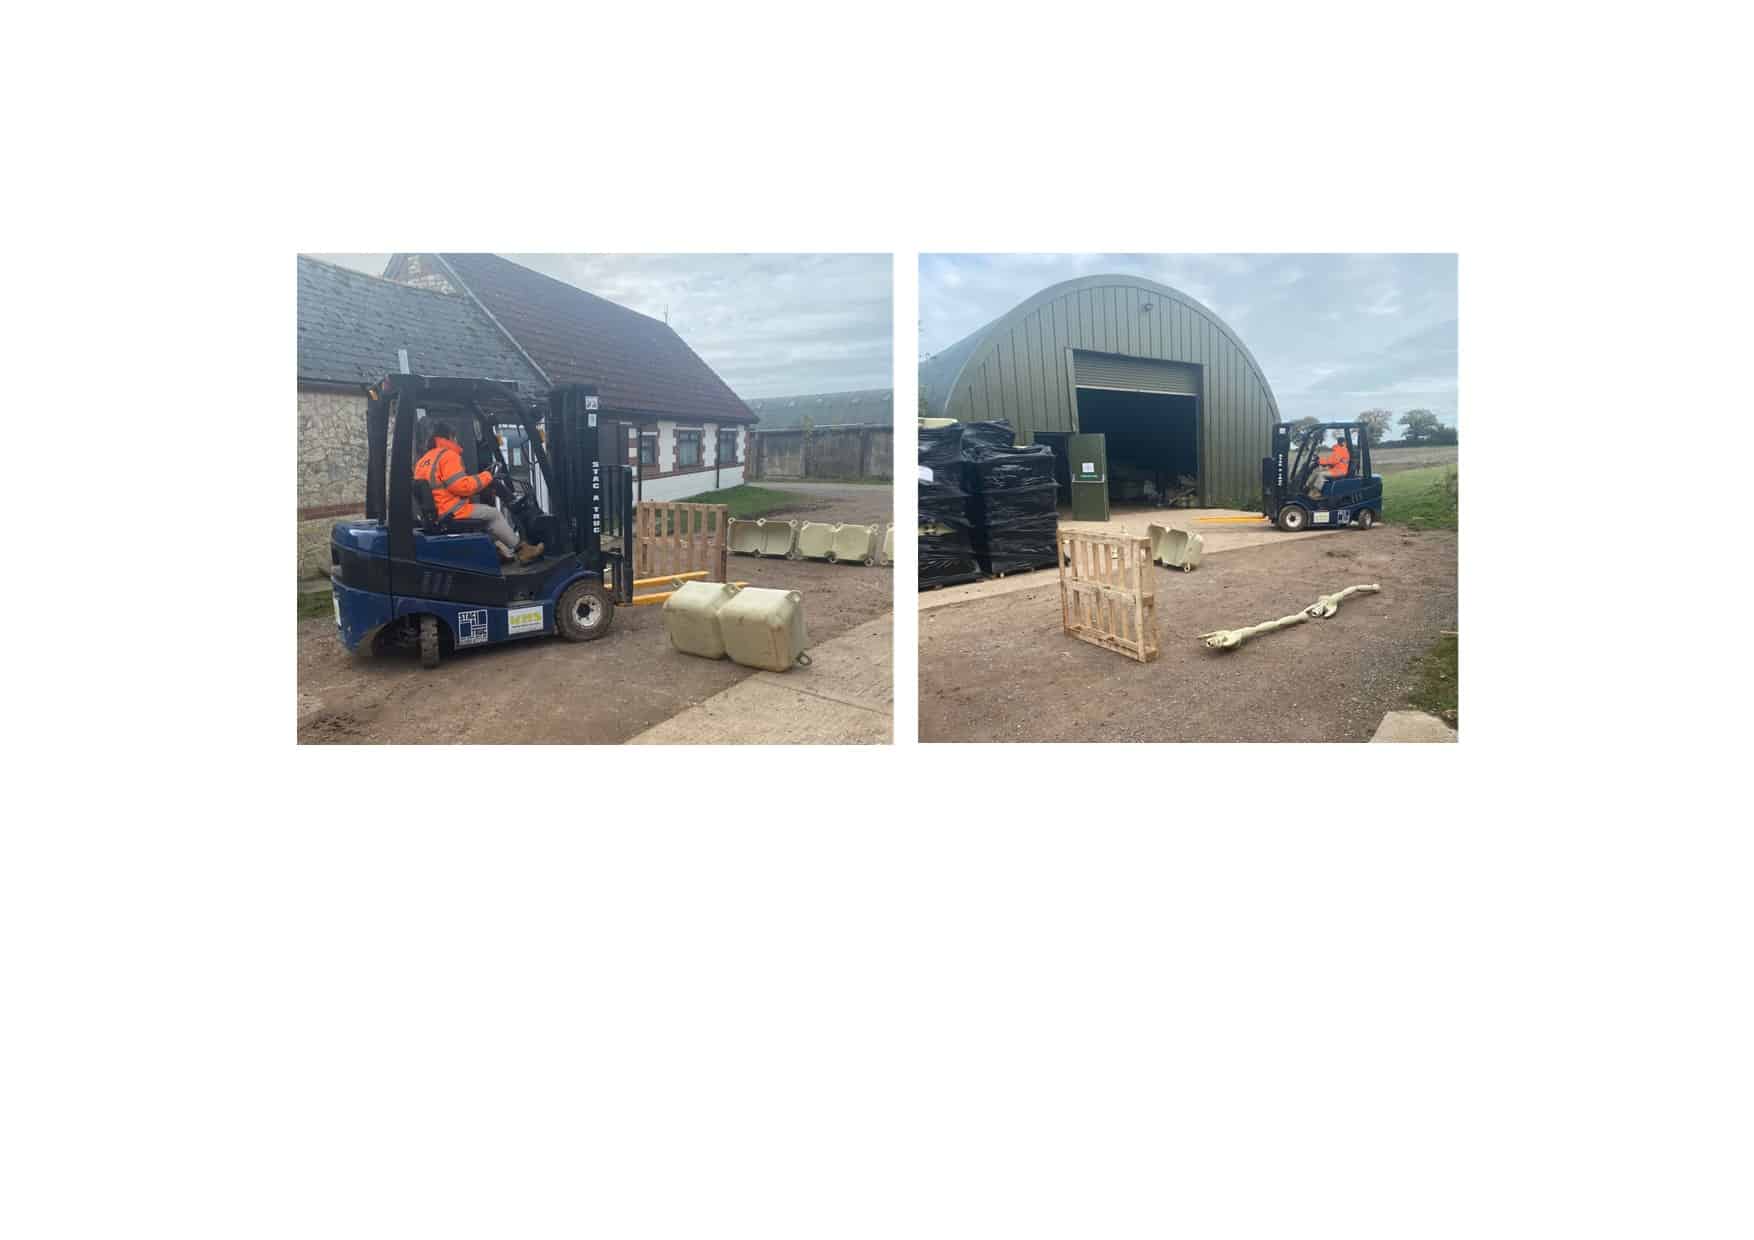 Forklift driving in the yard. Pallets, Modular cubes, Handrail posts, obstacle course